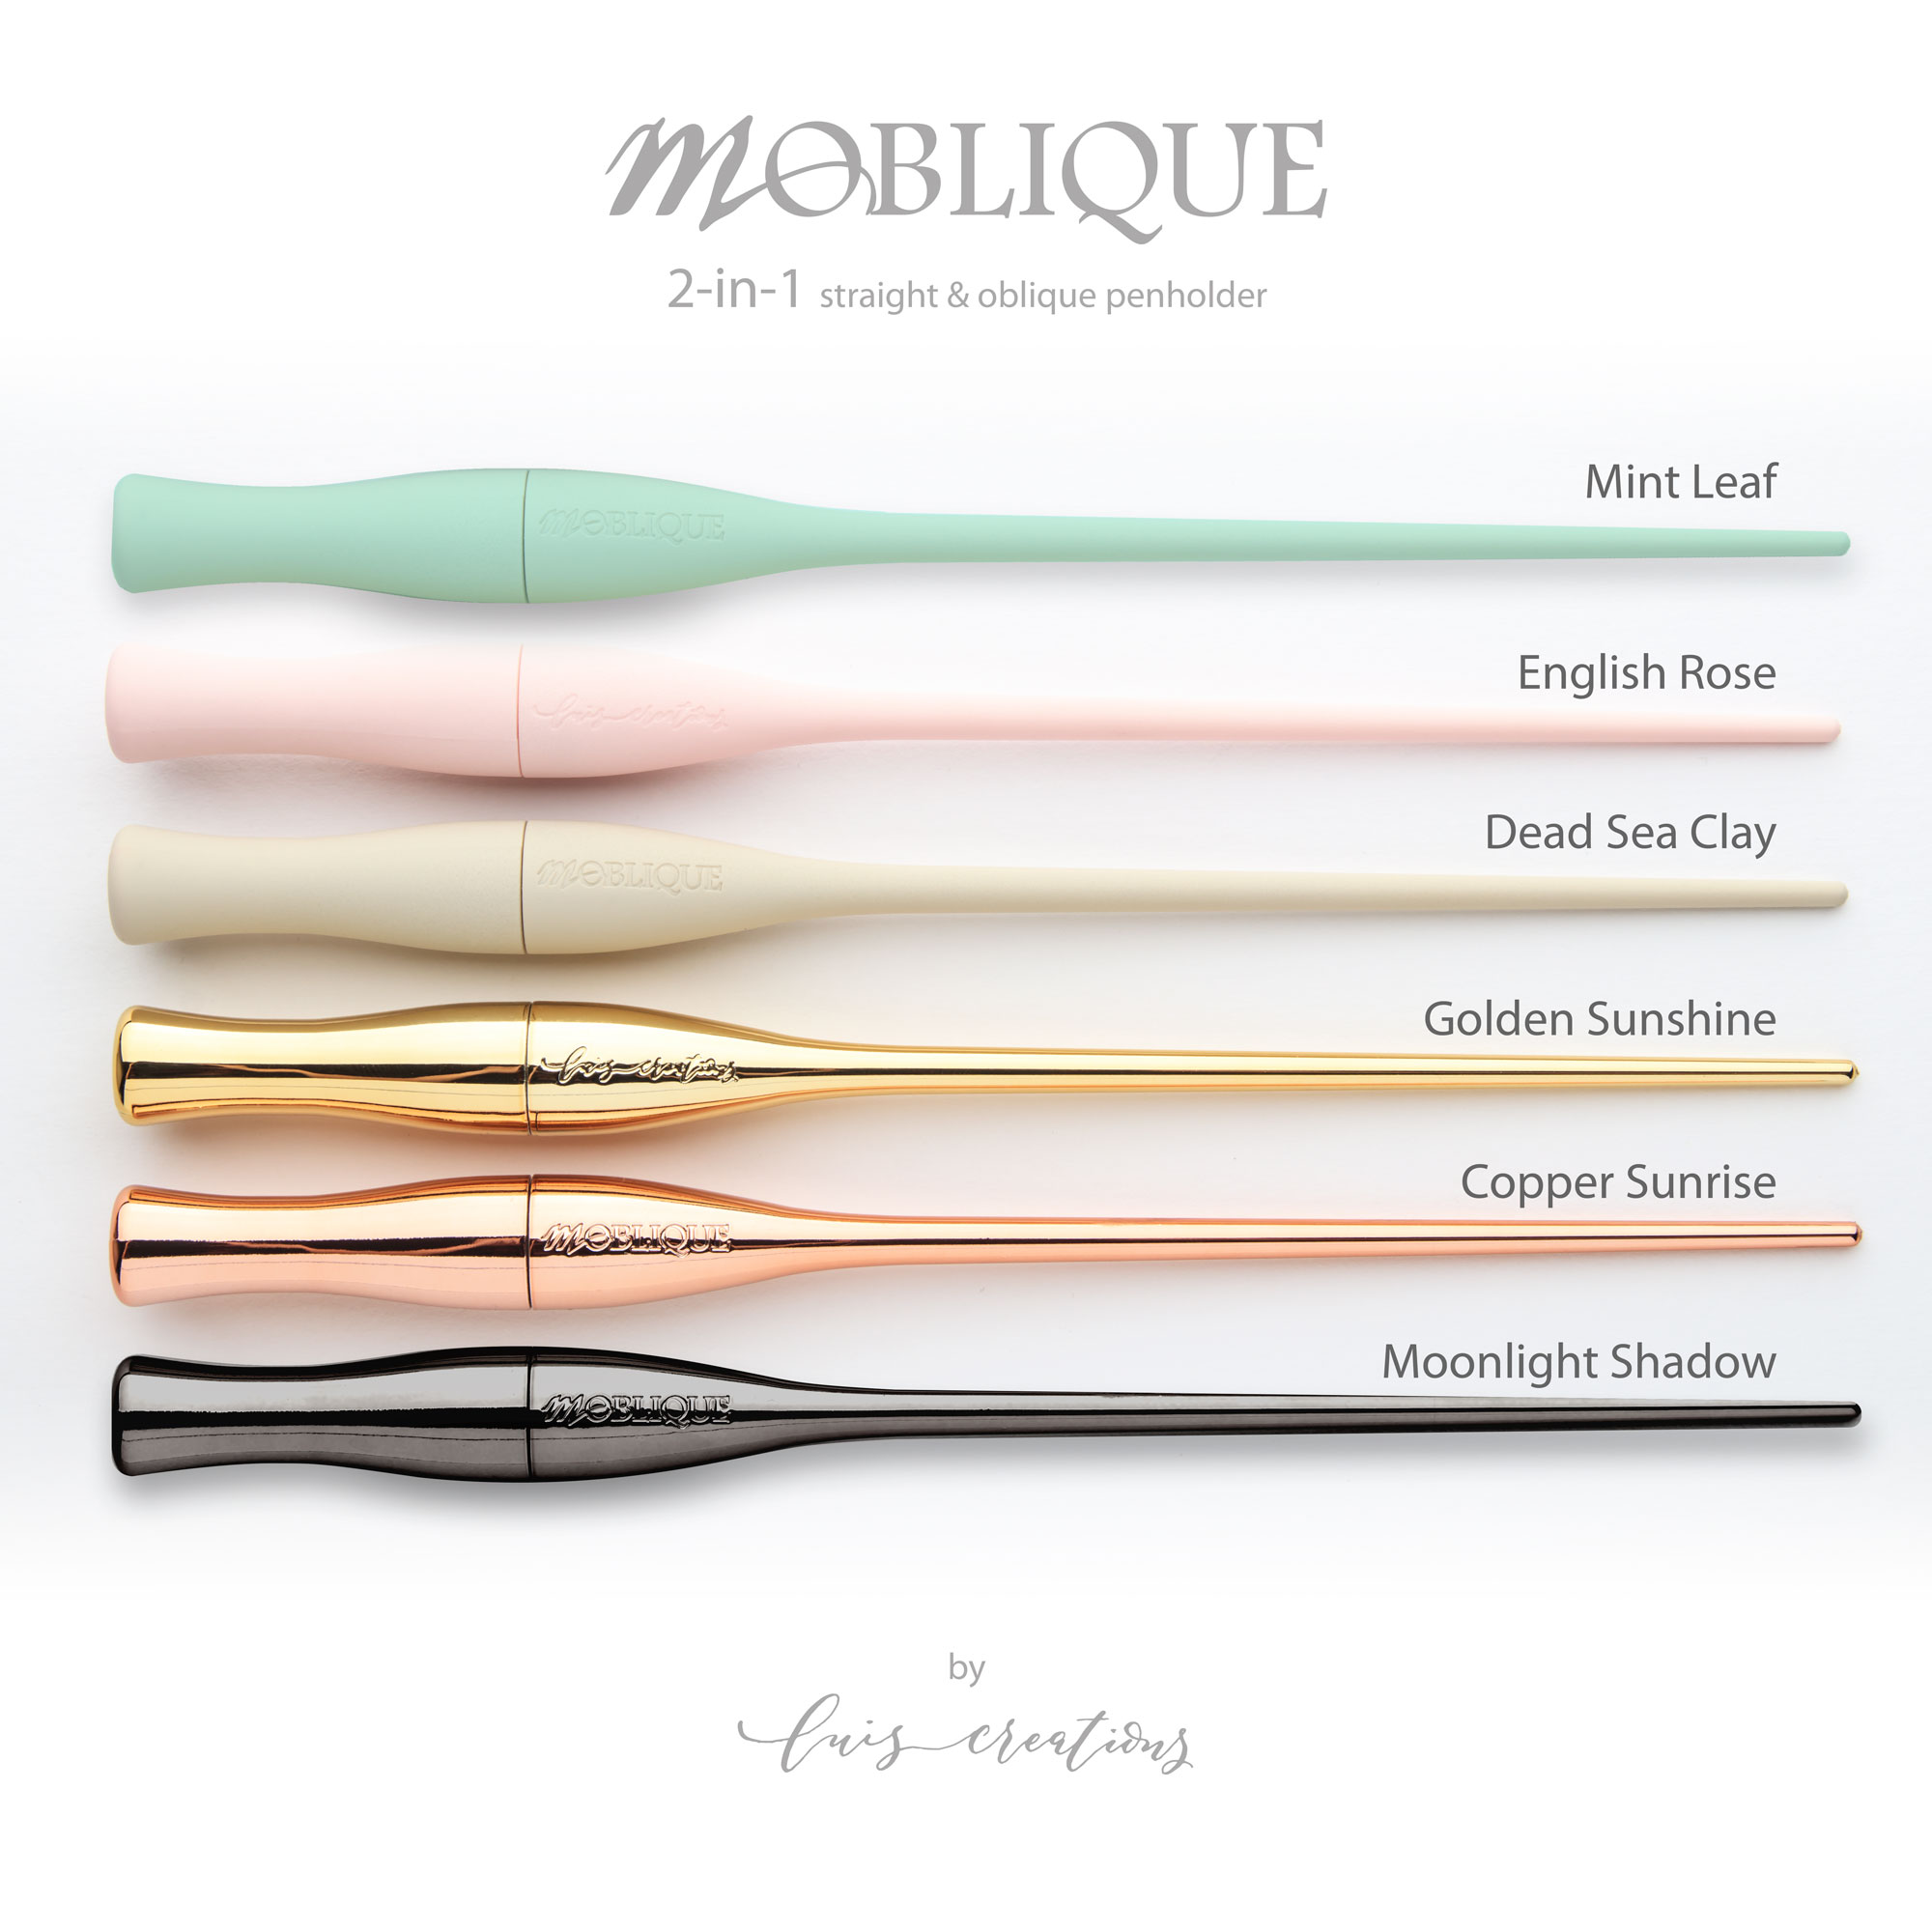 Moblique 2-in-1 Penholder Available Soon!